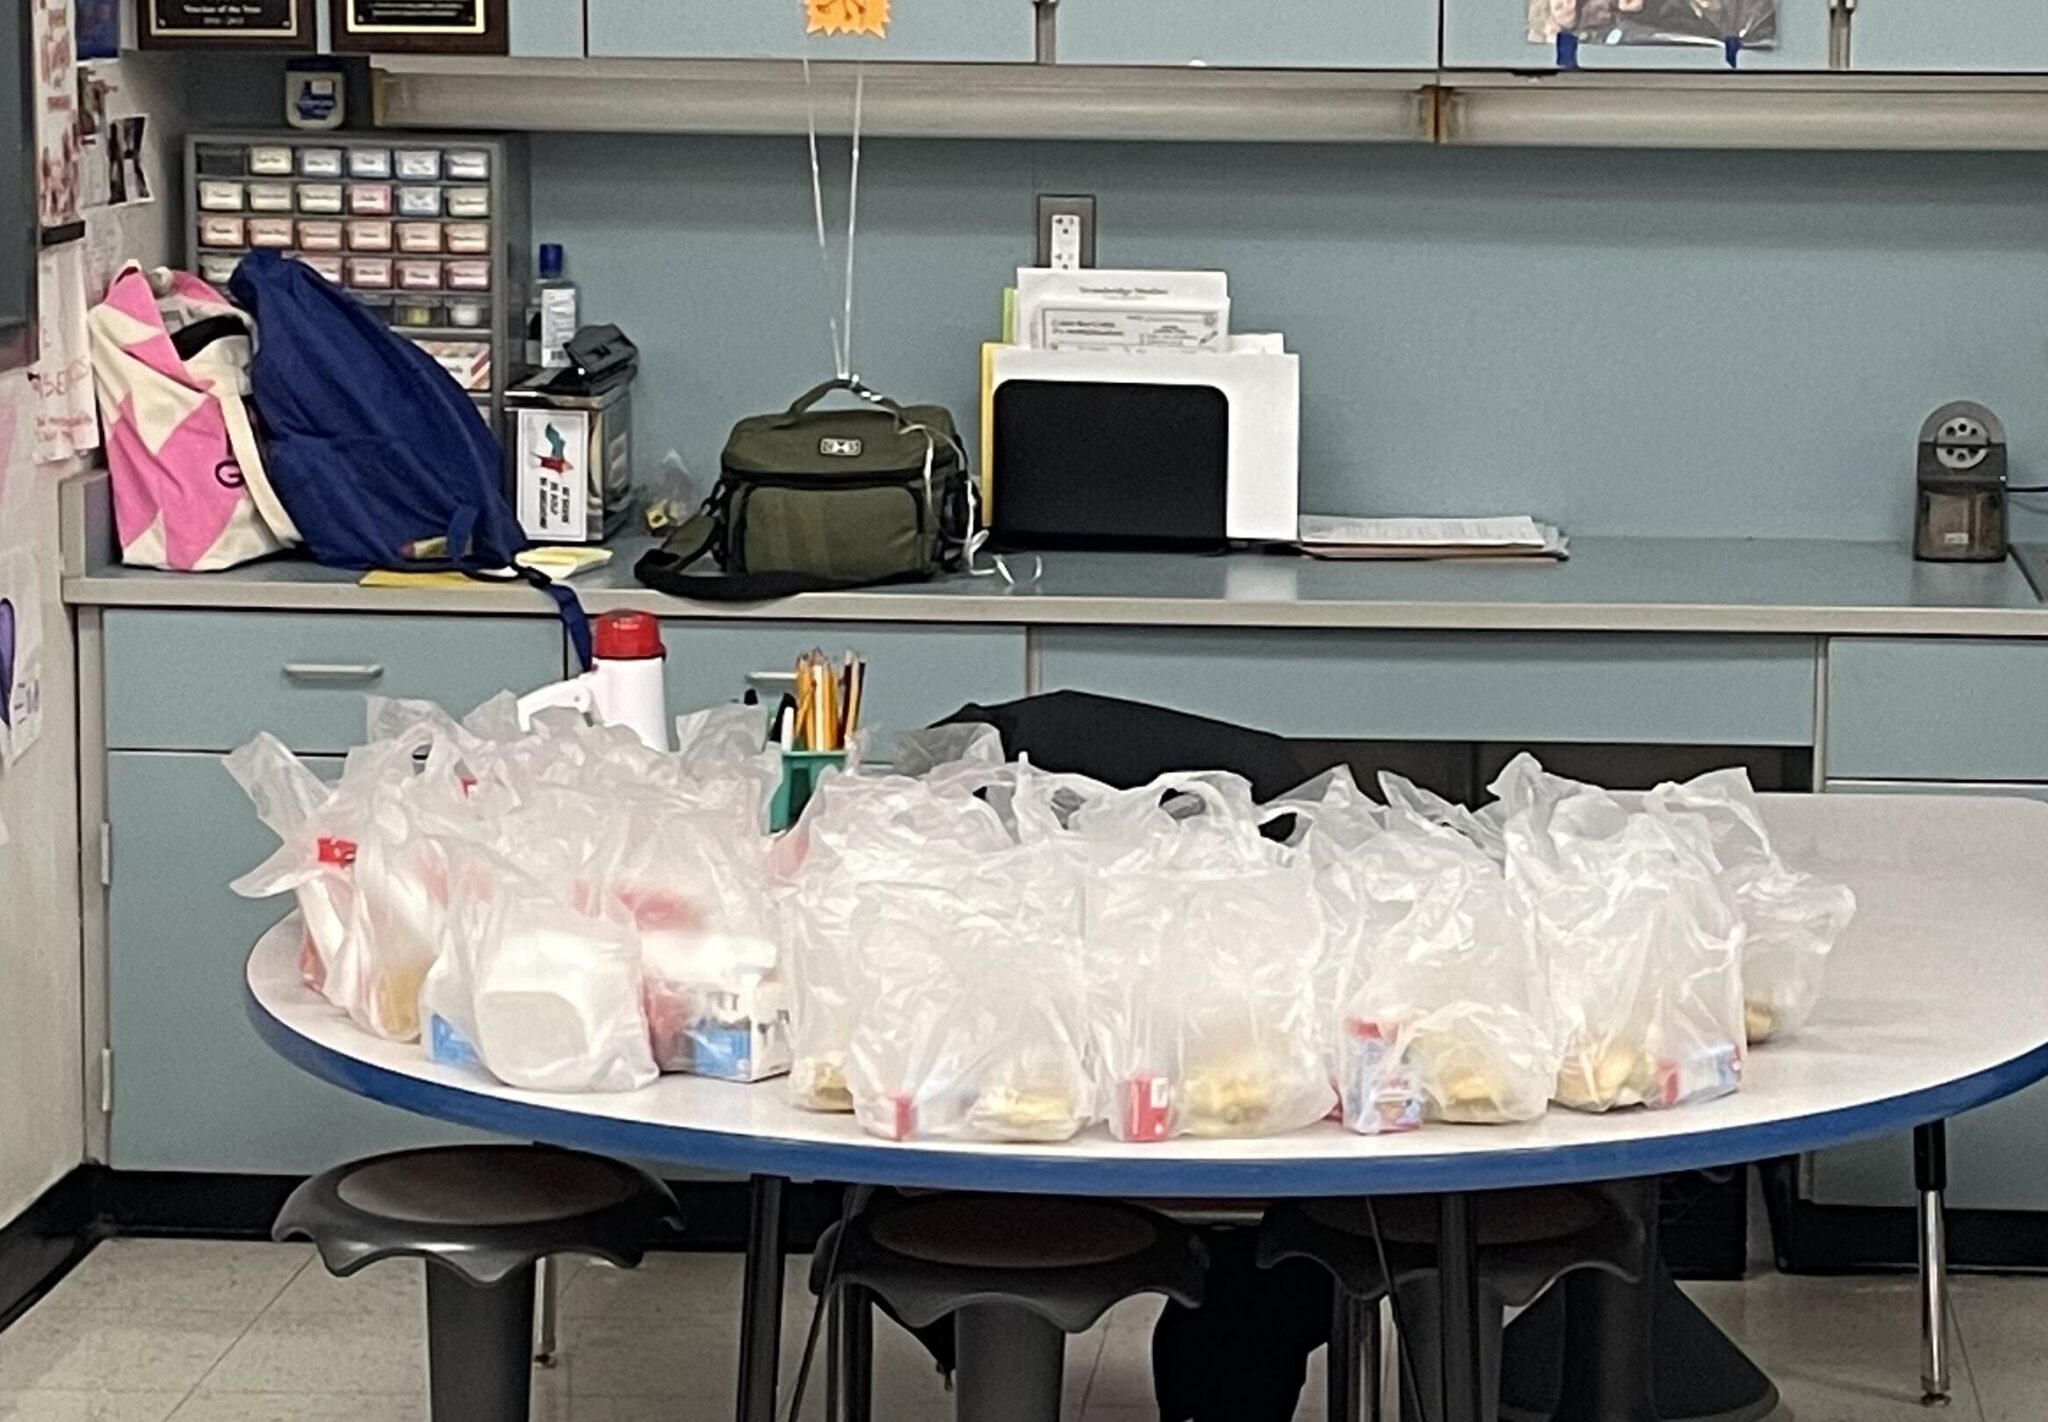 Several bags of breakfast items sit on a classroom table.